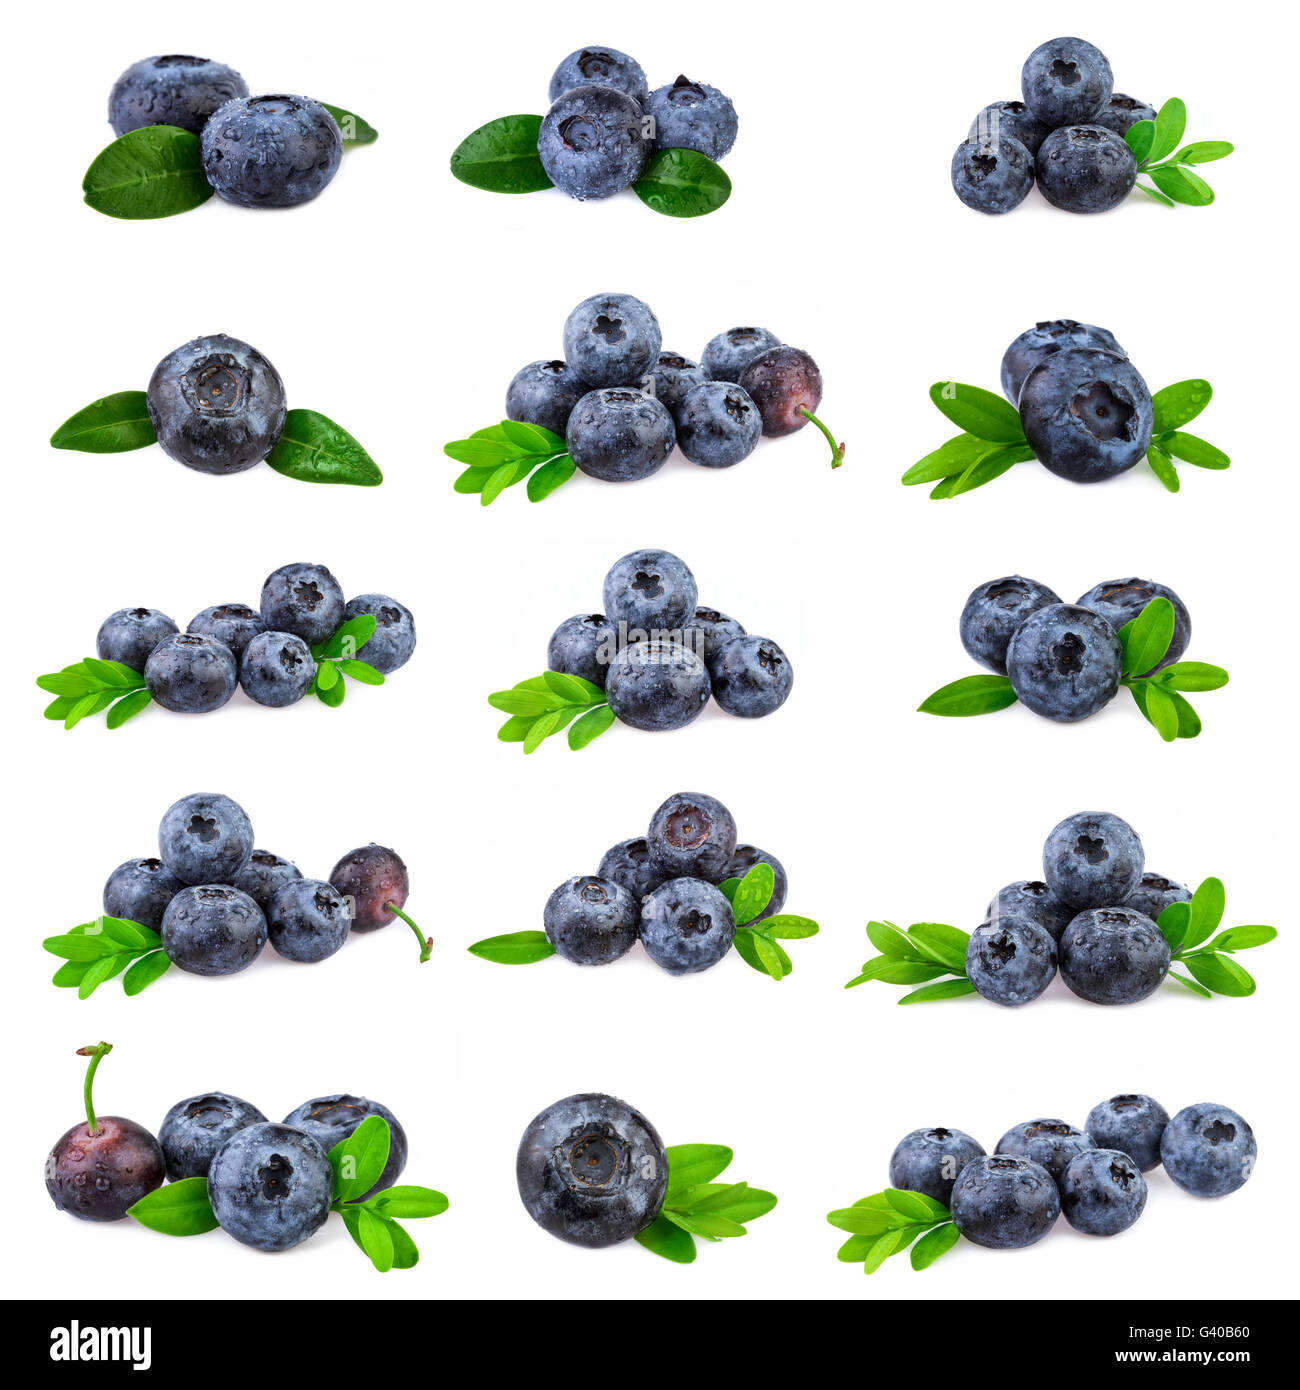 Blueberries Collection. Fresh blueberry with leaf isolated on white. Stock Photo